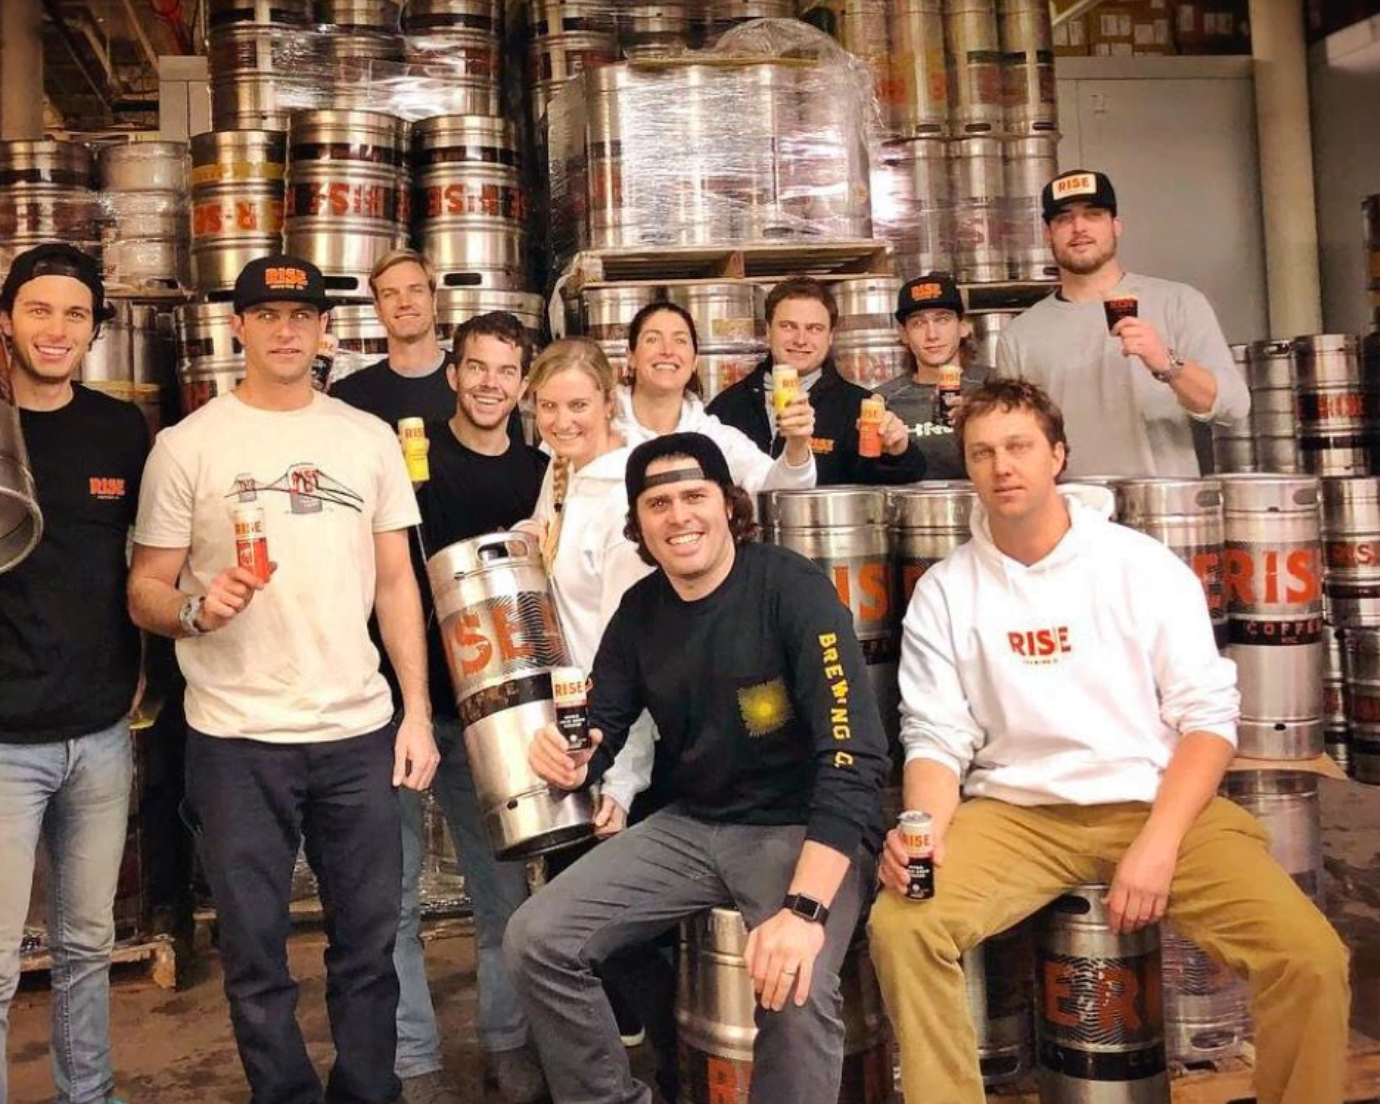 The RISE Brewing Co team.